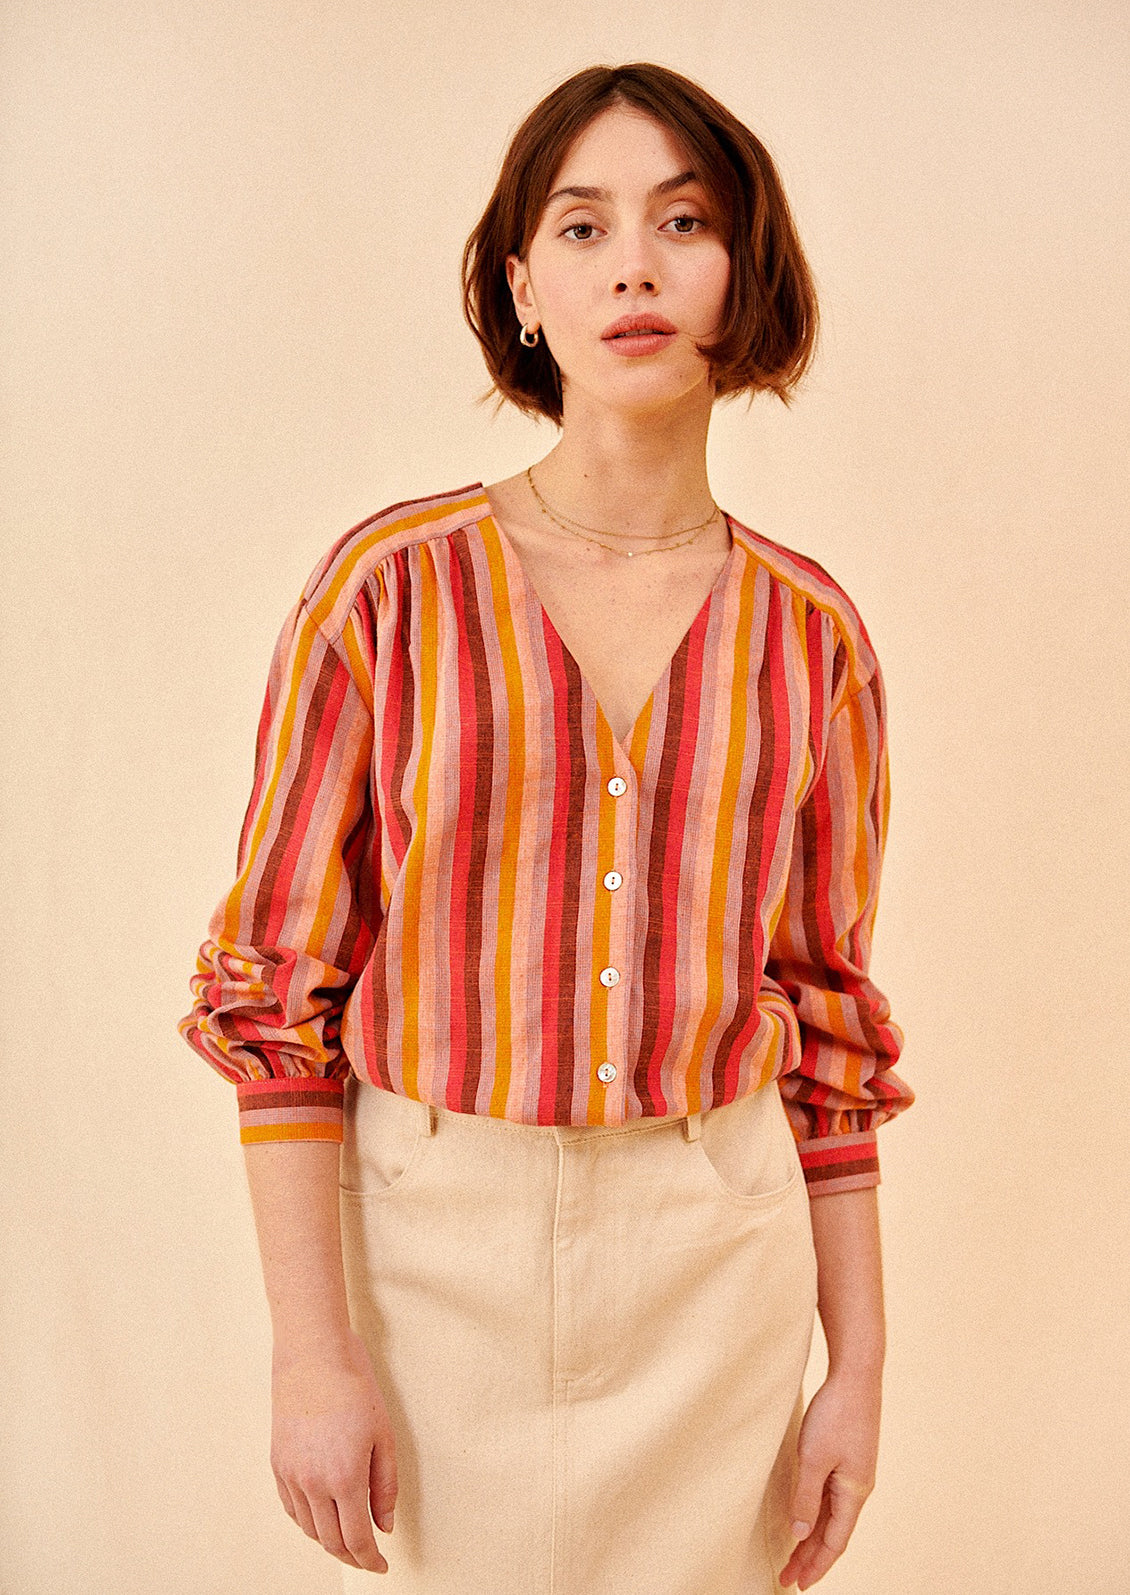 A woman wearing a v-neck, button front blouse in warm color stripe pattern.